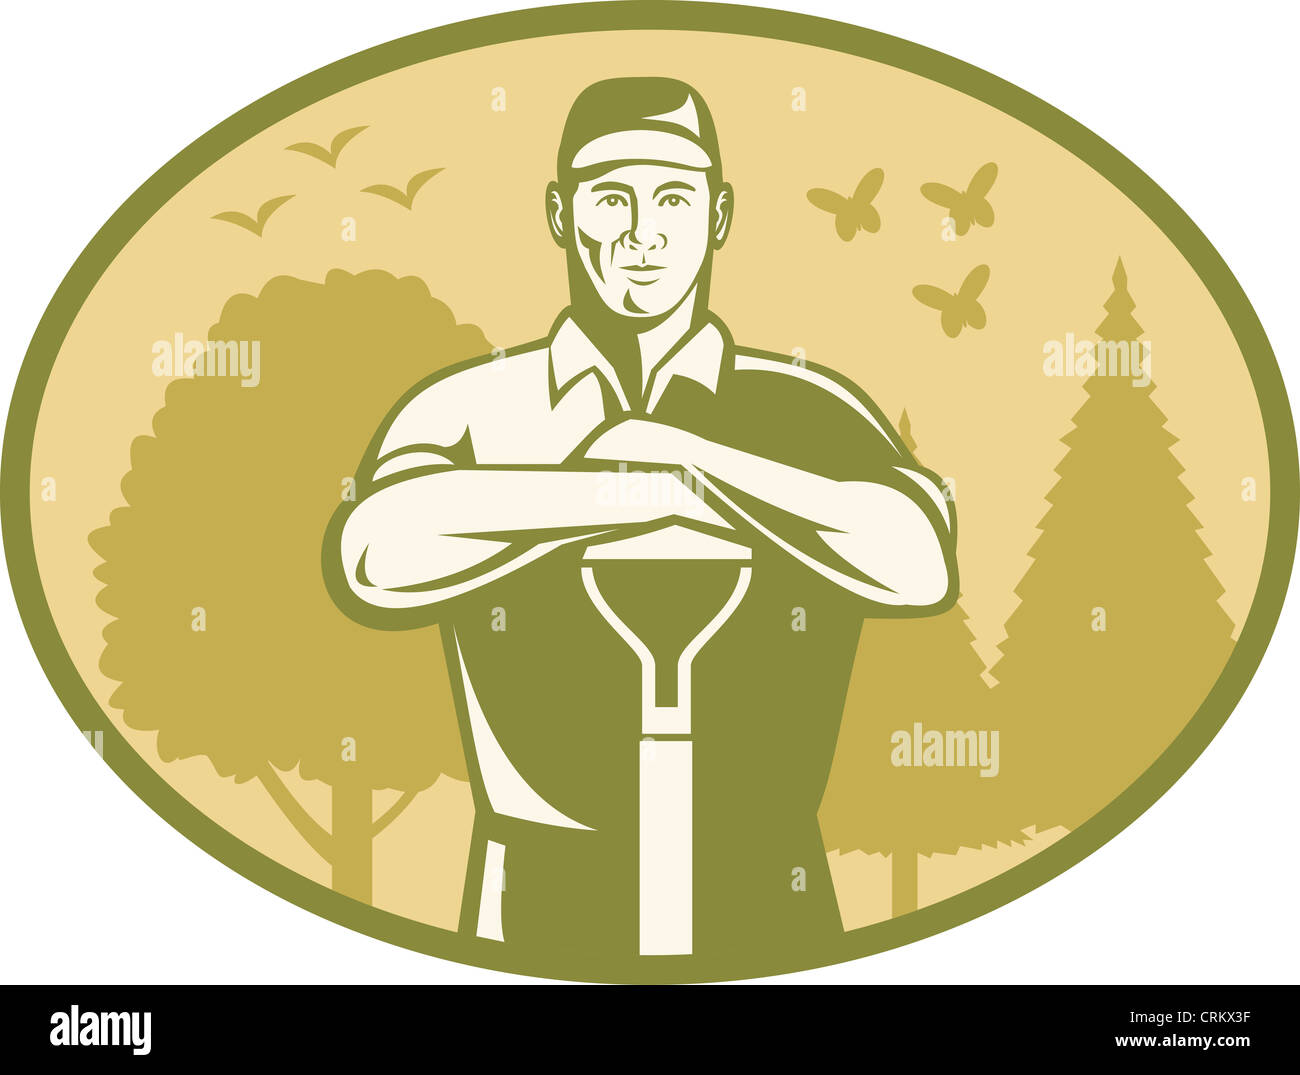 Retro illustration of a gardener leaning on a shovel set inside an oval with trees and birds background Stock Photo